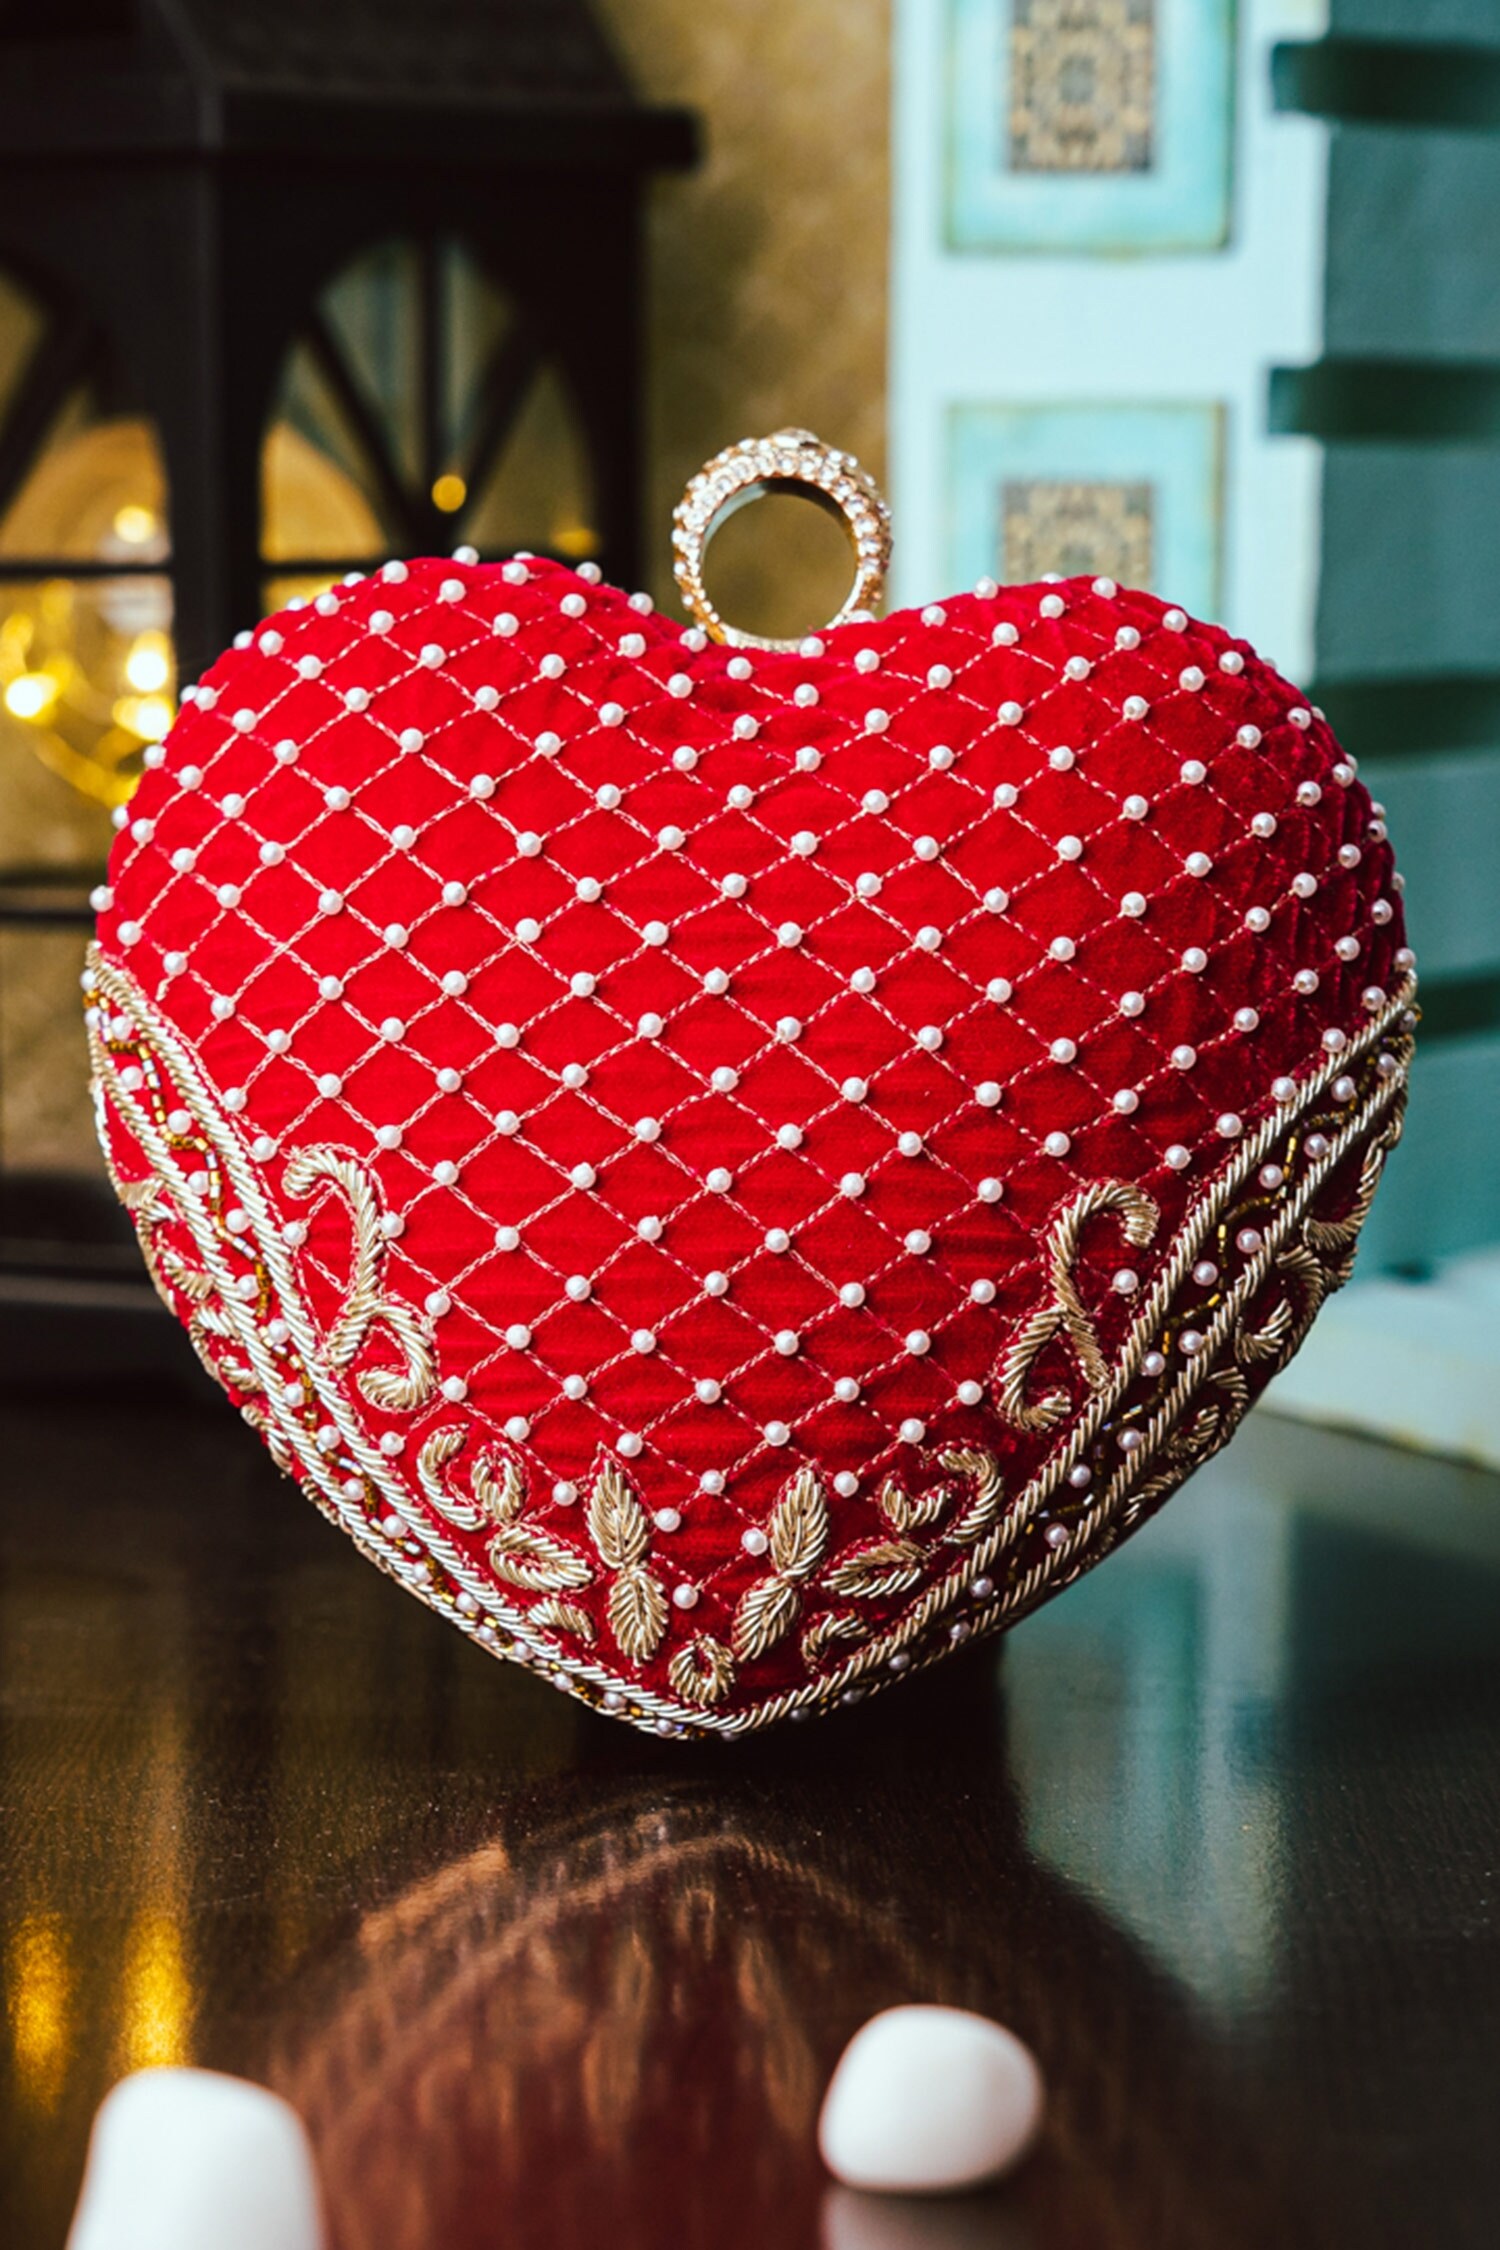 NR BY NIDHI RATHI Velvet Embroidered Heart Clutch